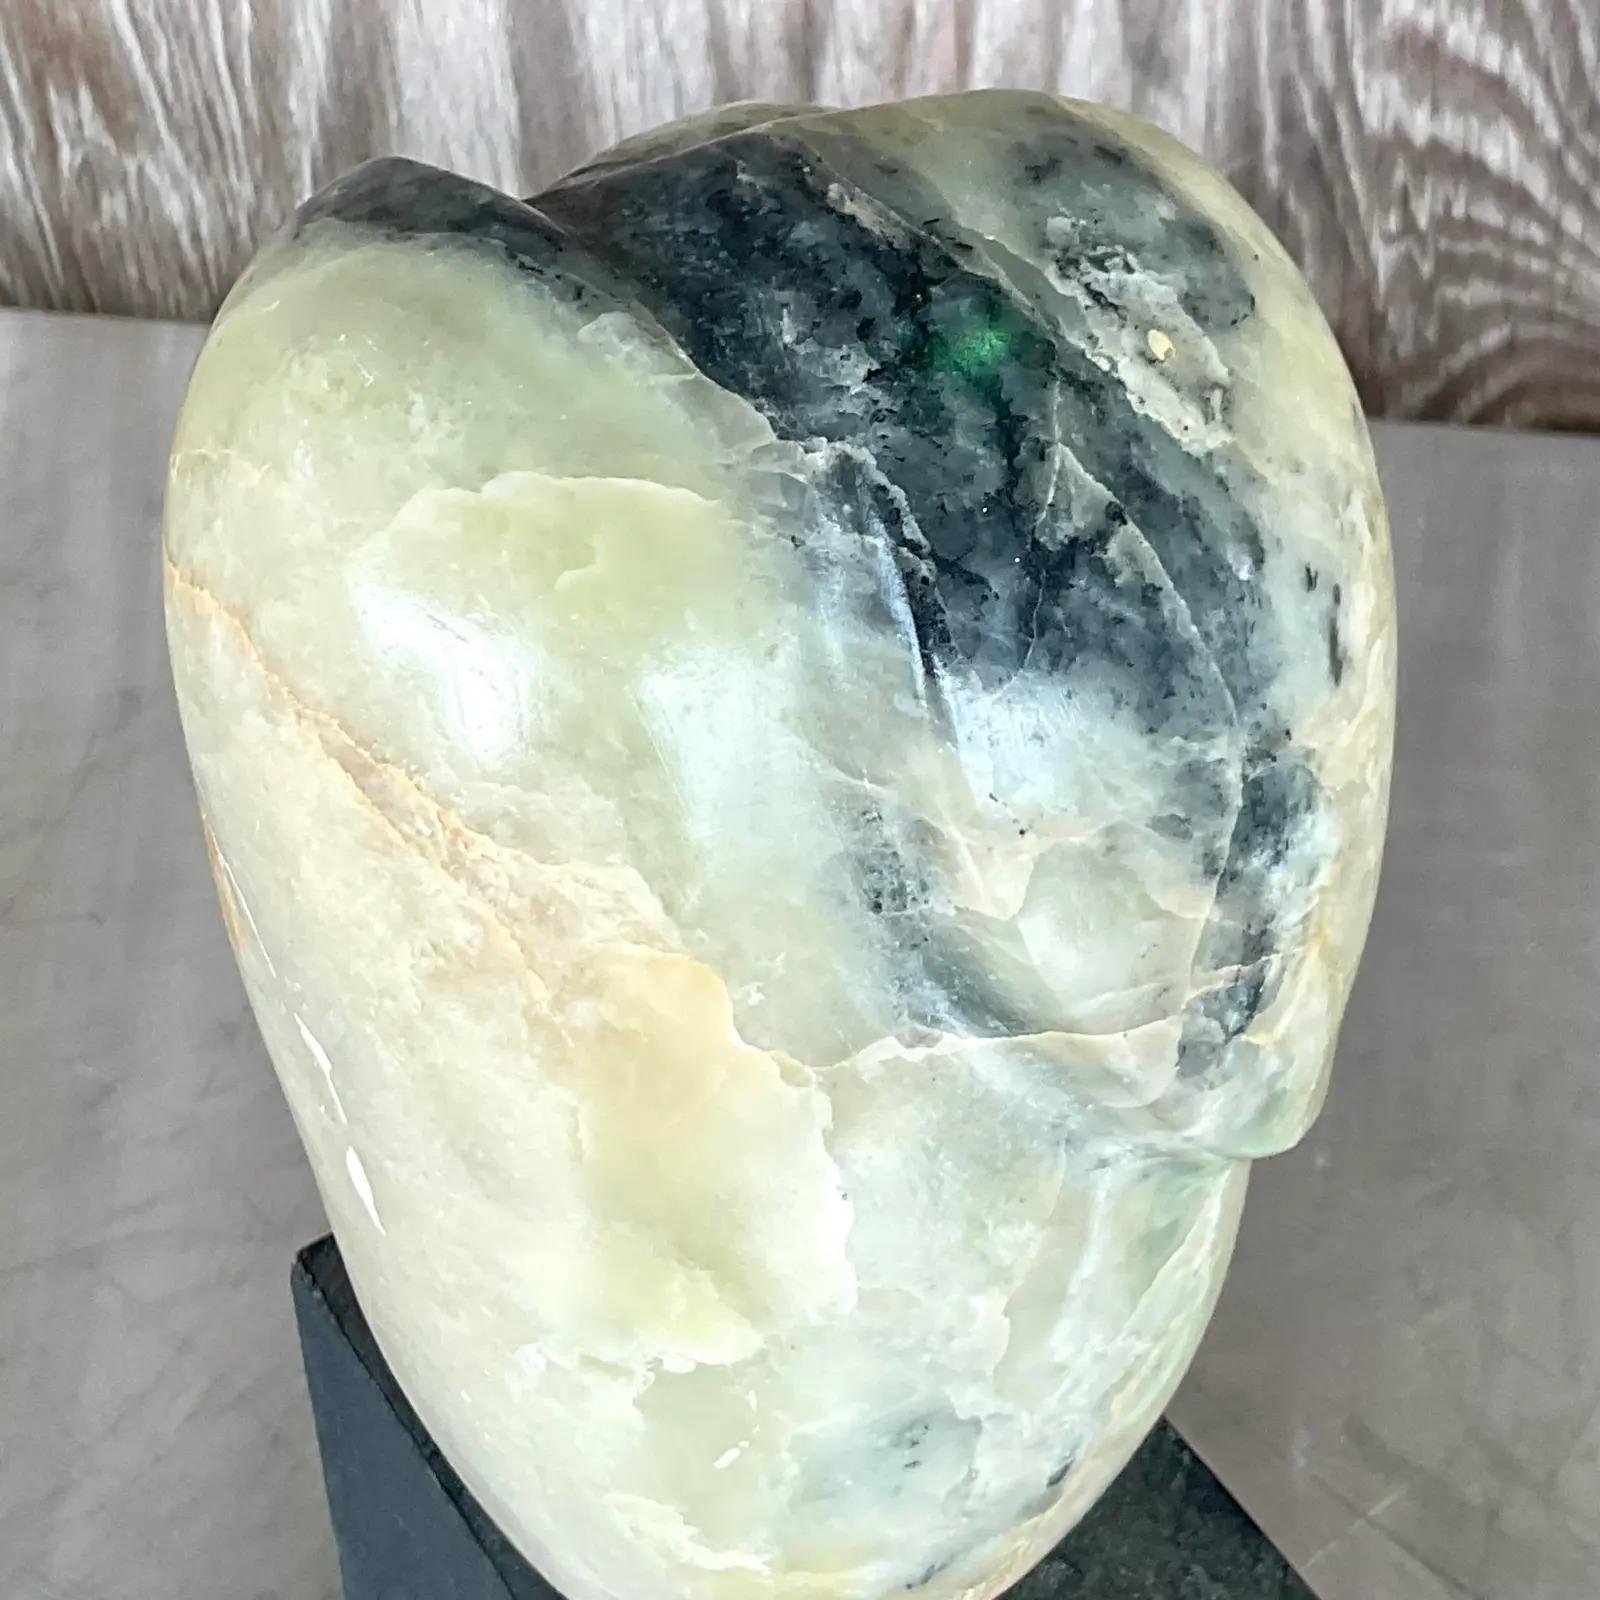 Fantastic vintage Boho sculpture. Beautiful hand carved stone in striking pale greens and black. Rests on a black painted wood block. Acquired from a Palm Beach estate.